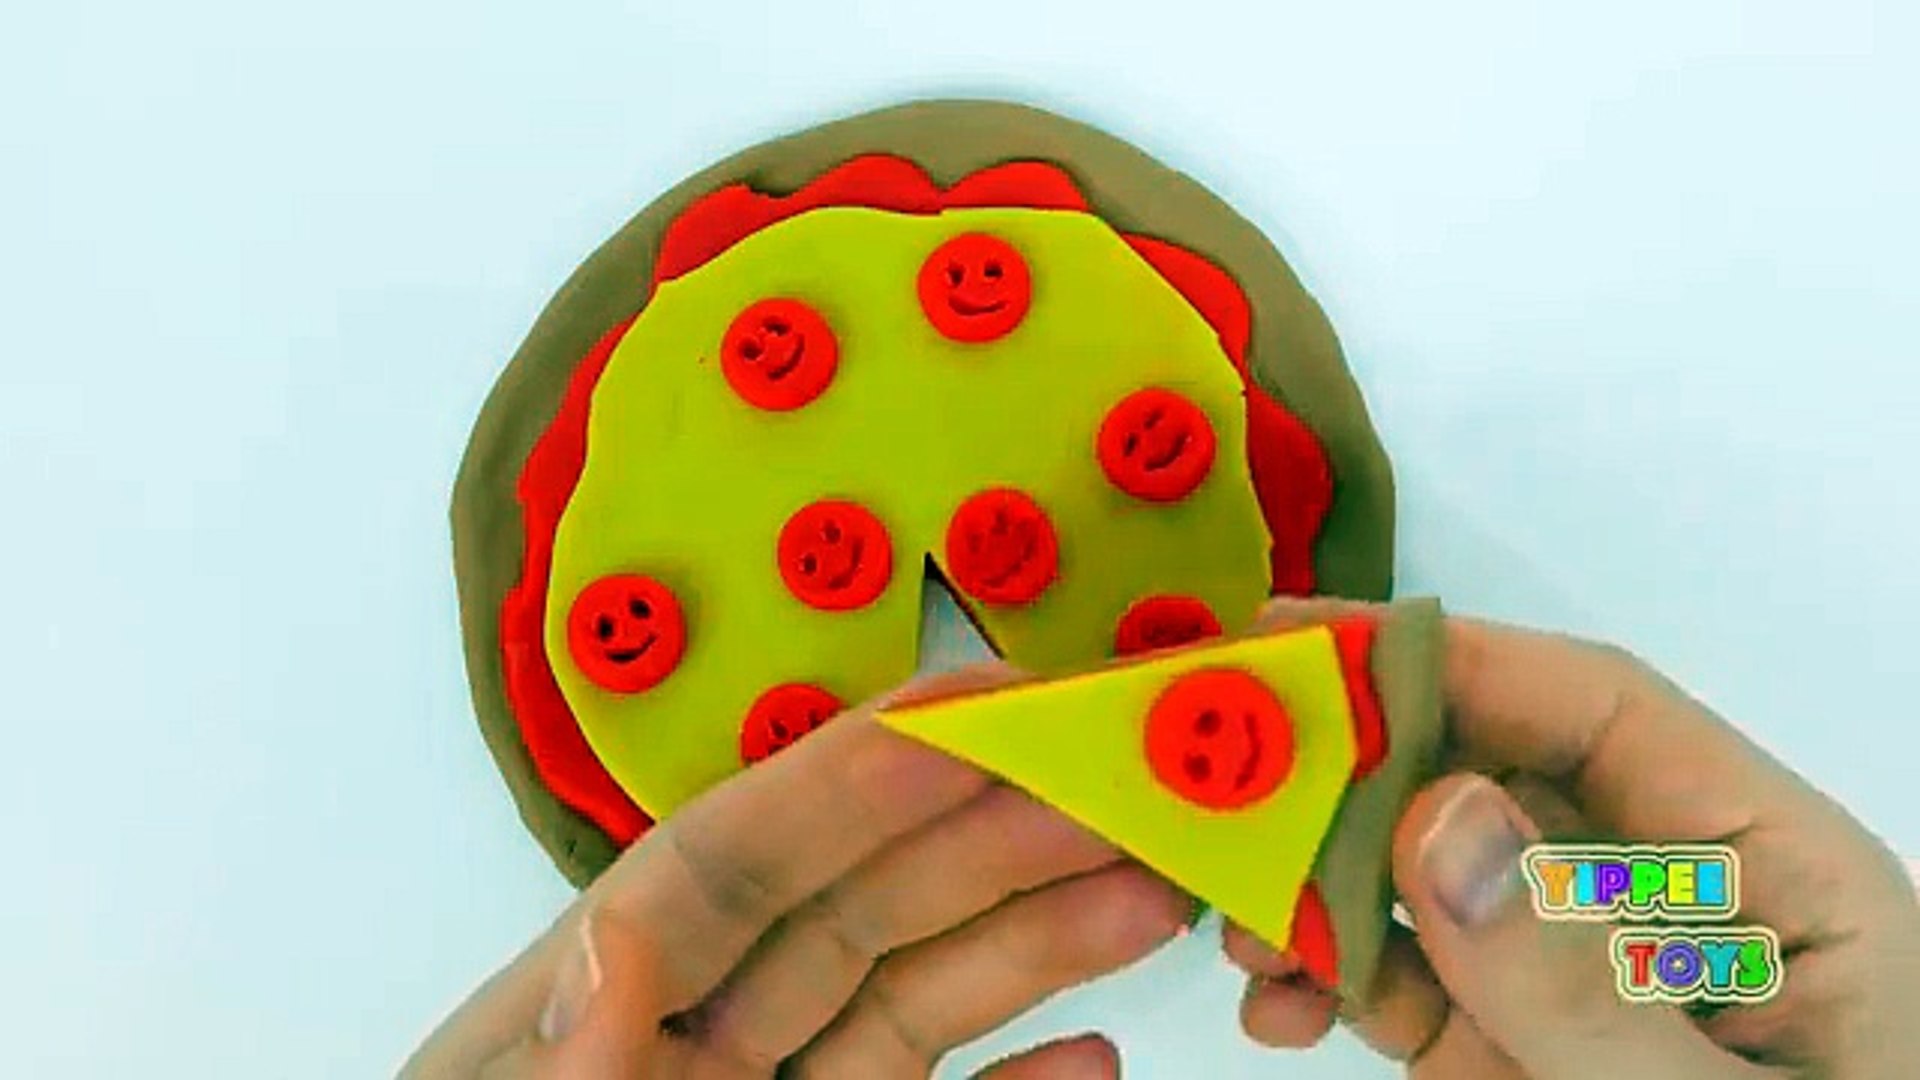 How to Make Pizza With Play Doh - Instructables